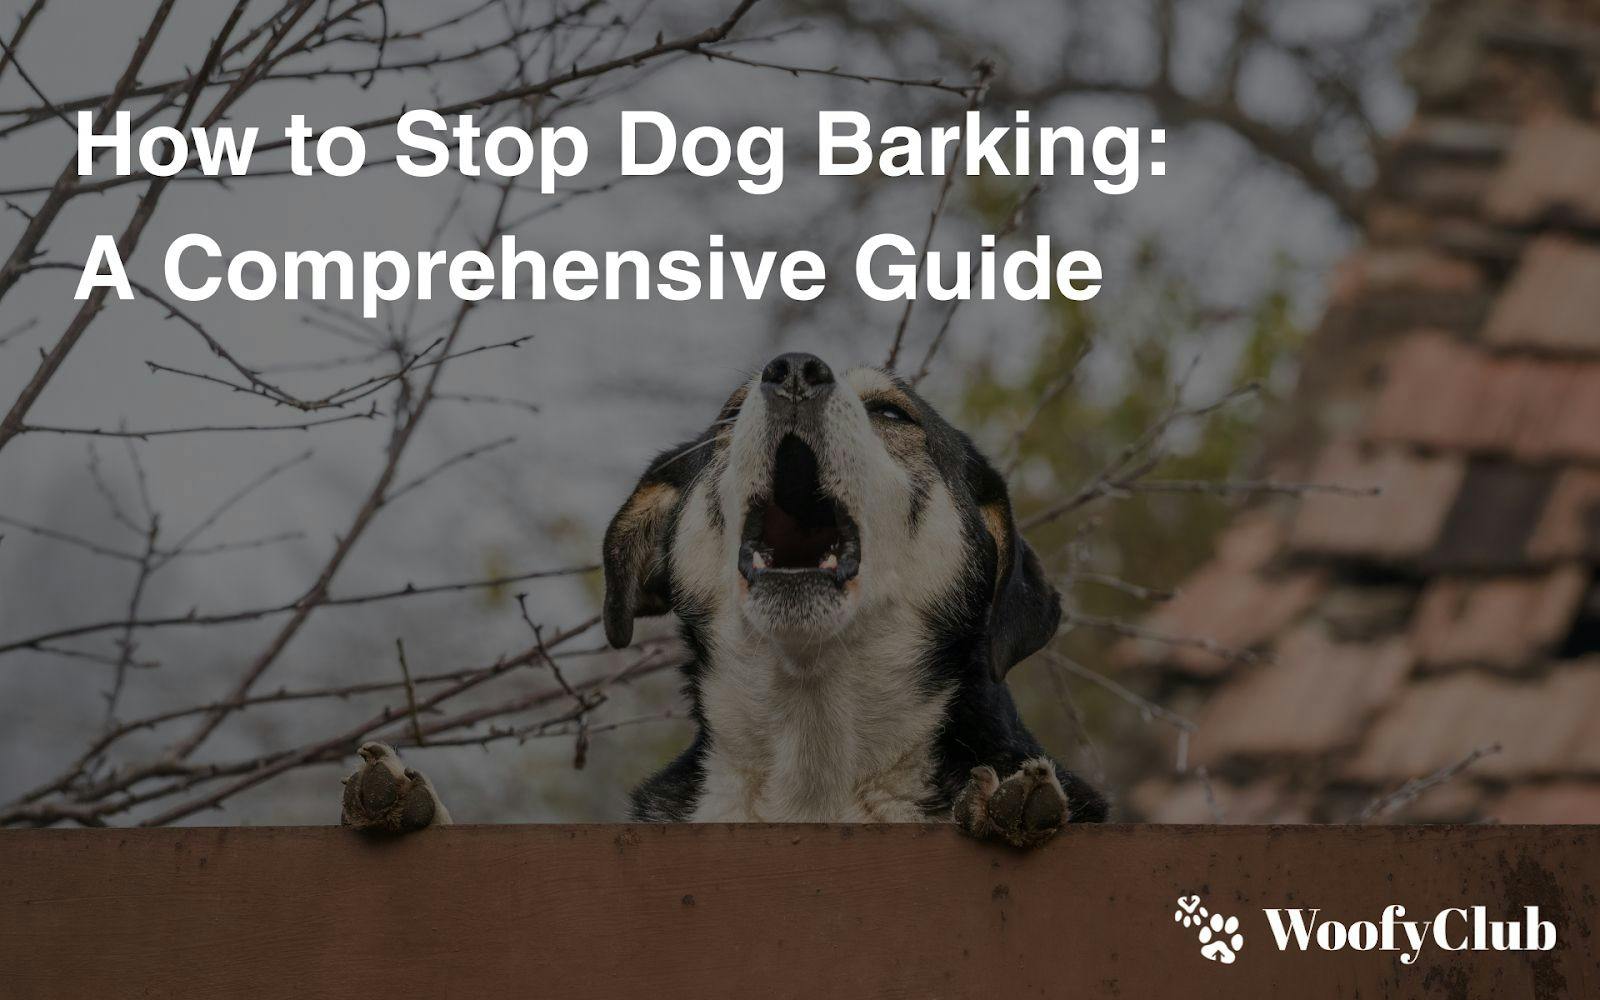 How To Stop Dog Barking: A Comprehensive Guide